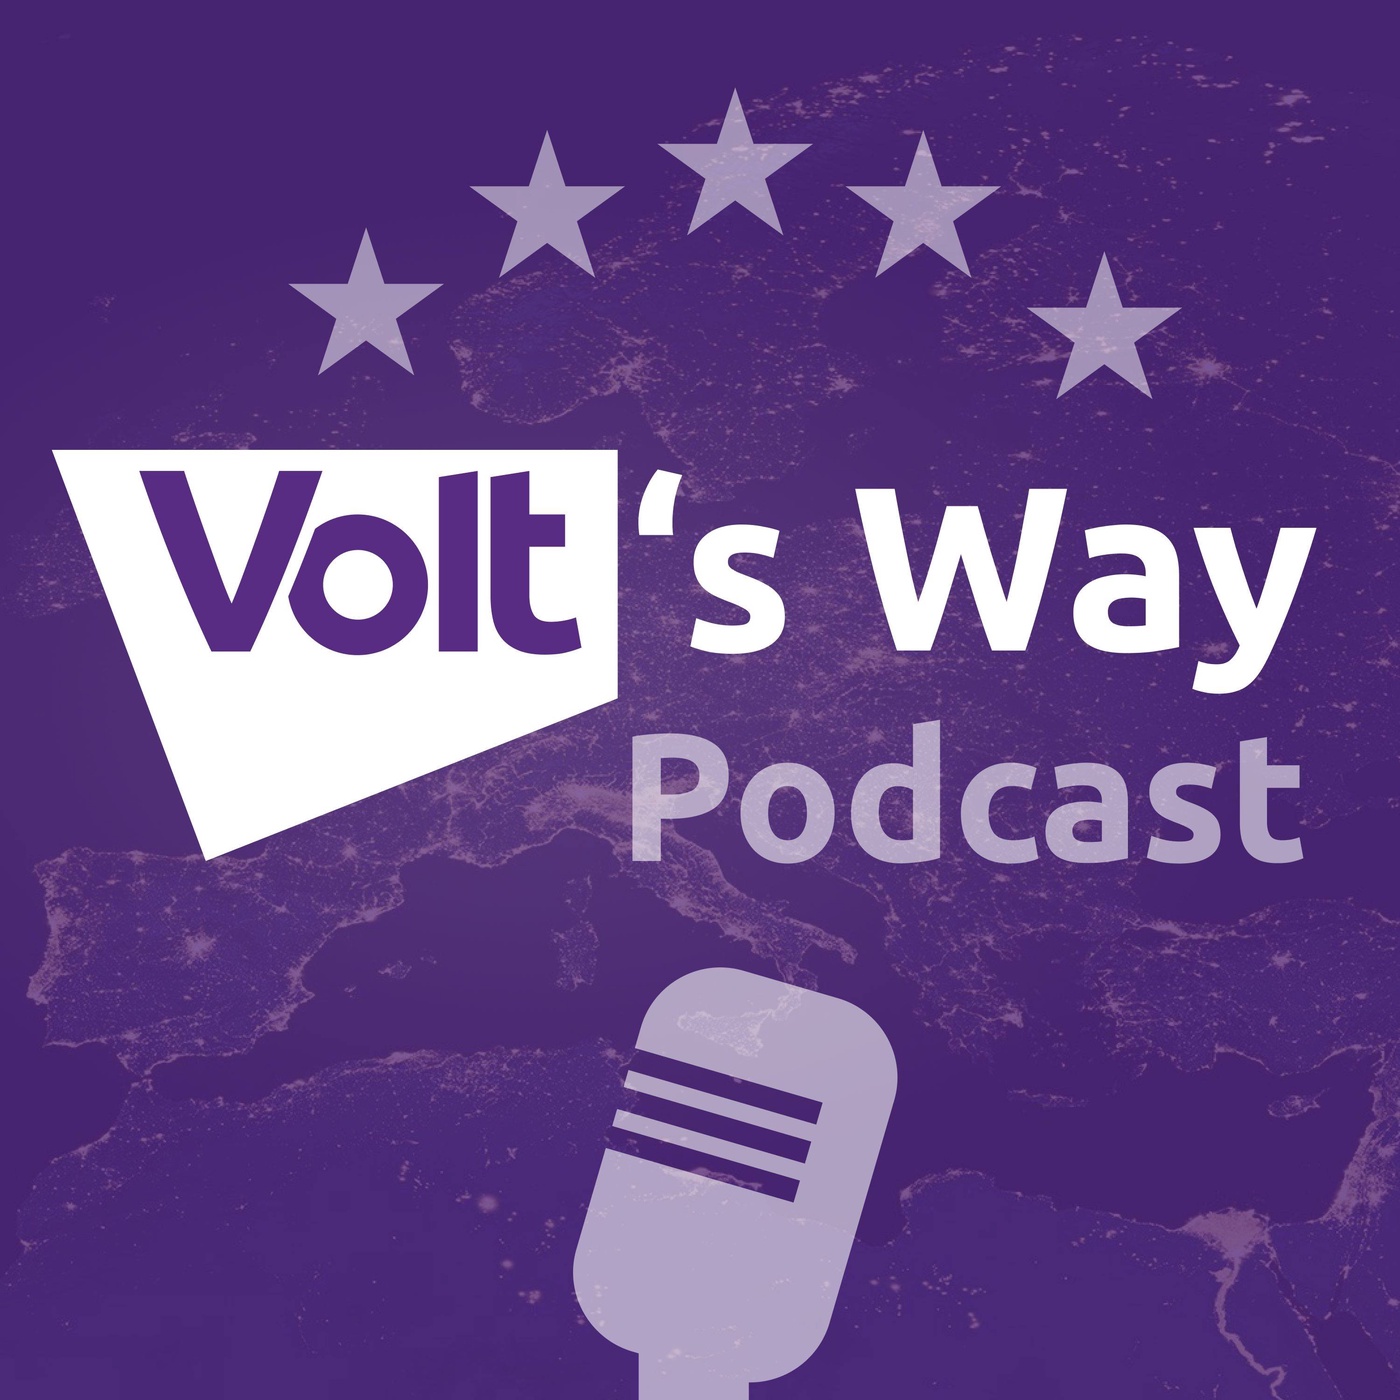 50. Folge Special - Q&A Damian Boeselager - Volt's Way - Unser Europa Podcast - Folge 03.13